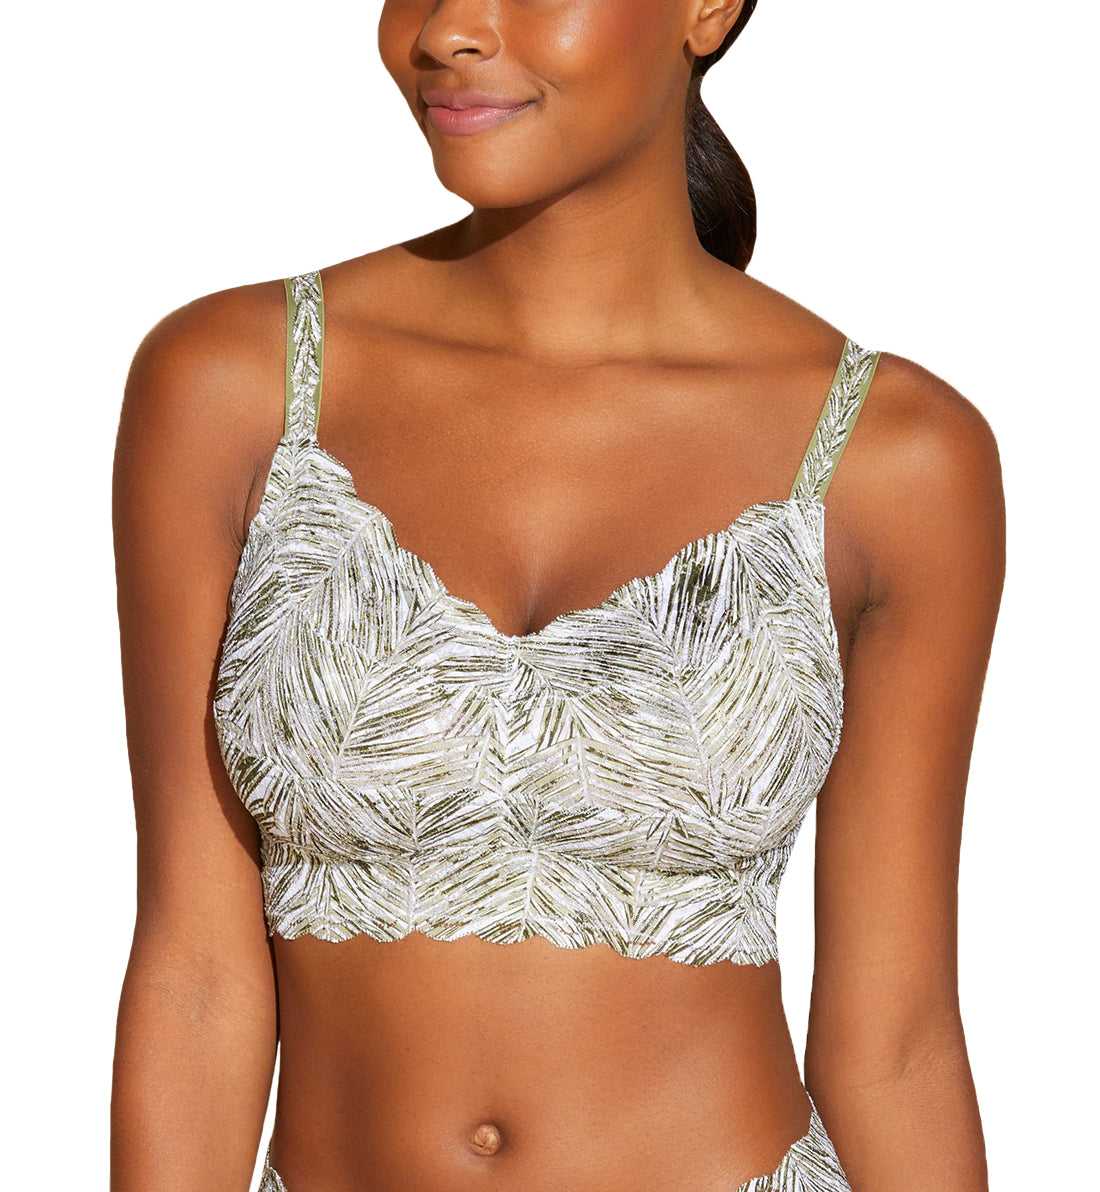 Cosabella Never Say Never Printed CURVY Sweetie Bralette (NEVEP1310),XS,Palm Aloe - Palm Aloe,XS